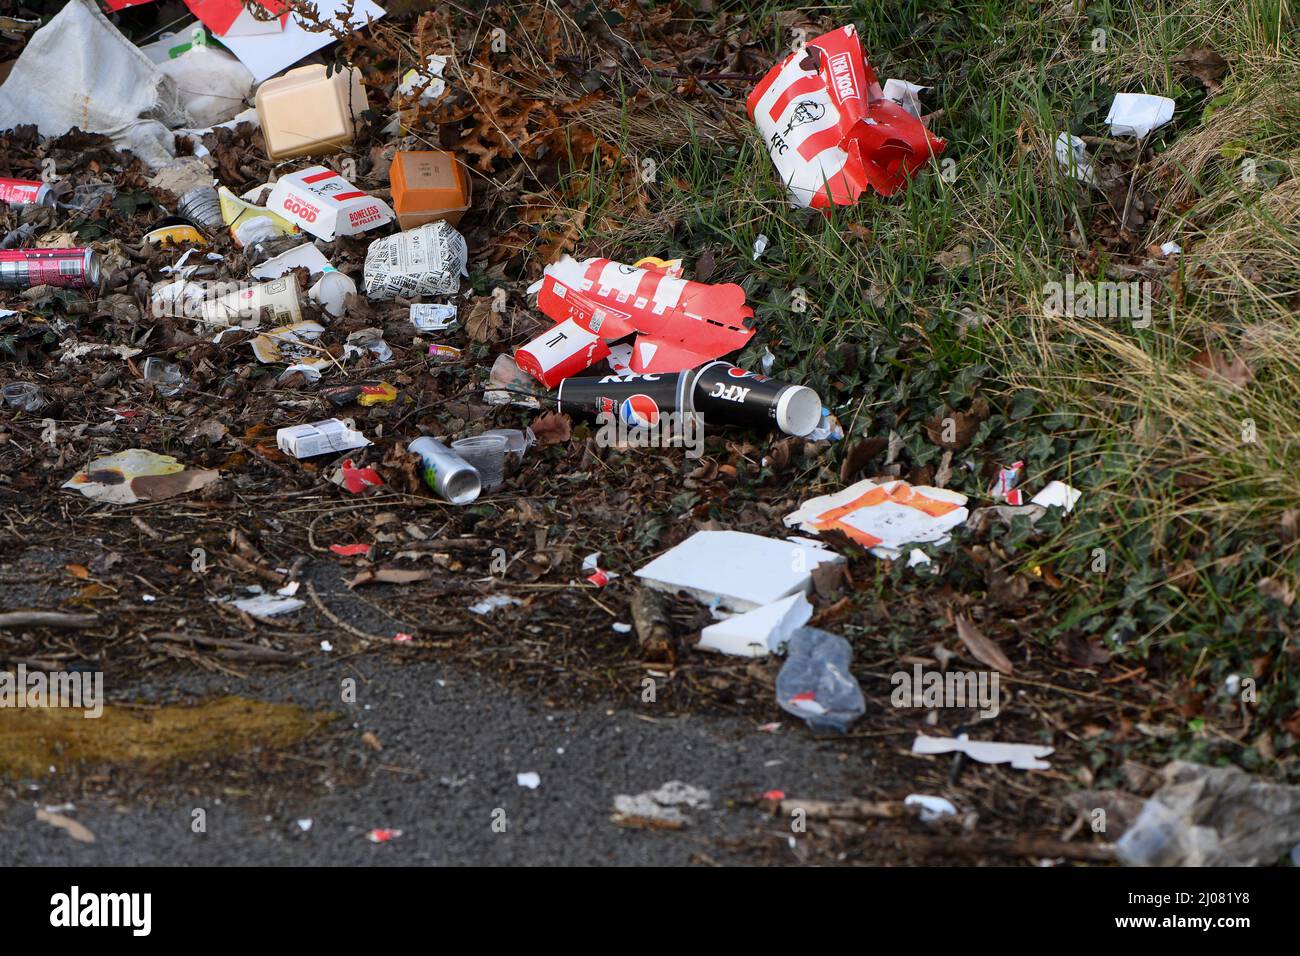 Fast food outlets Kentucky fried chicken and McDonalds waste littering a car park near the take-away restaurants in Southampton UK left by customers. Stock Photo